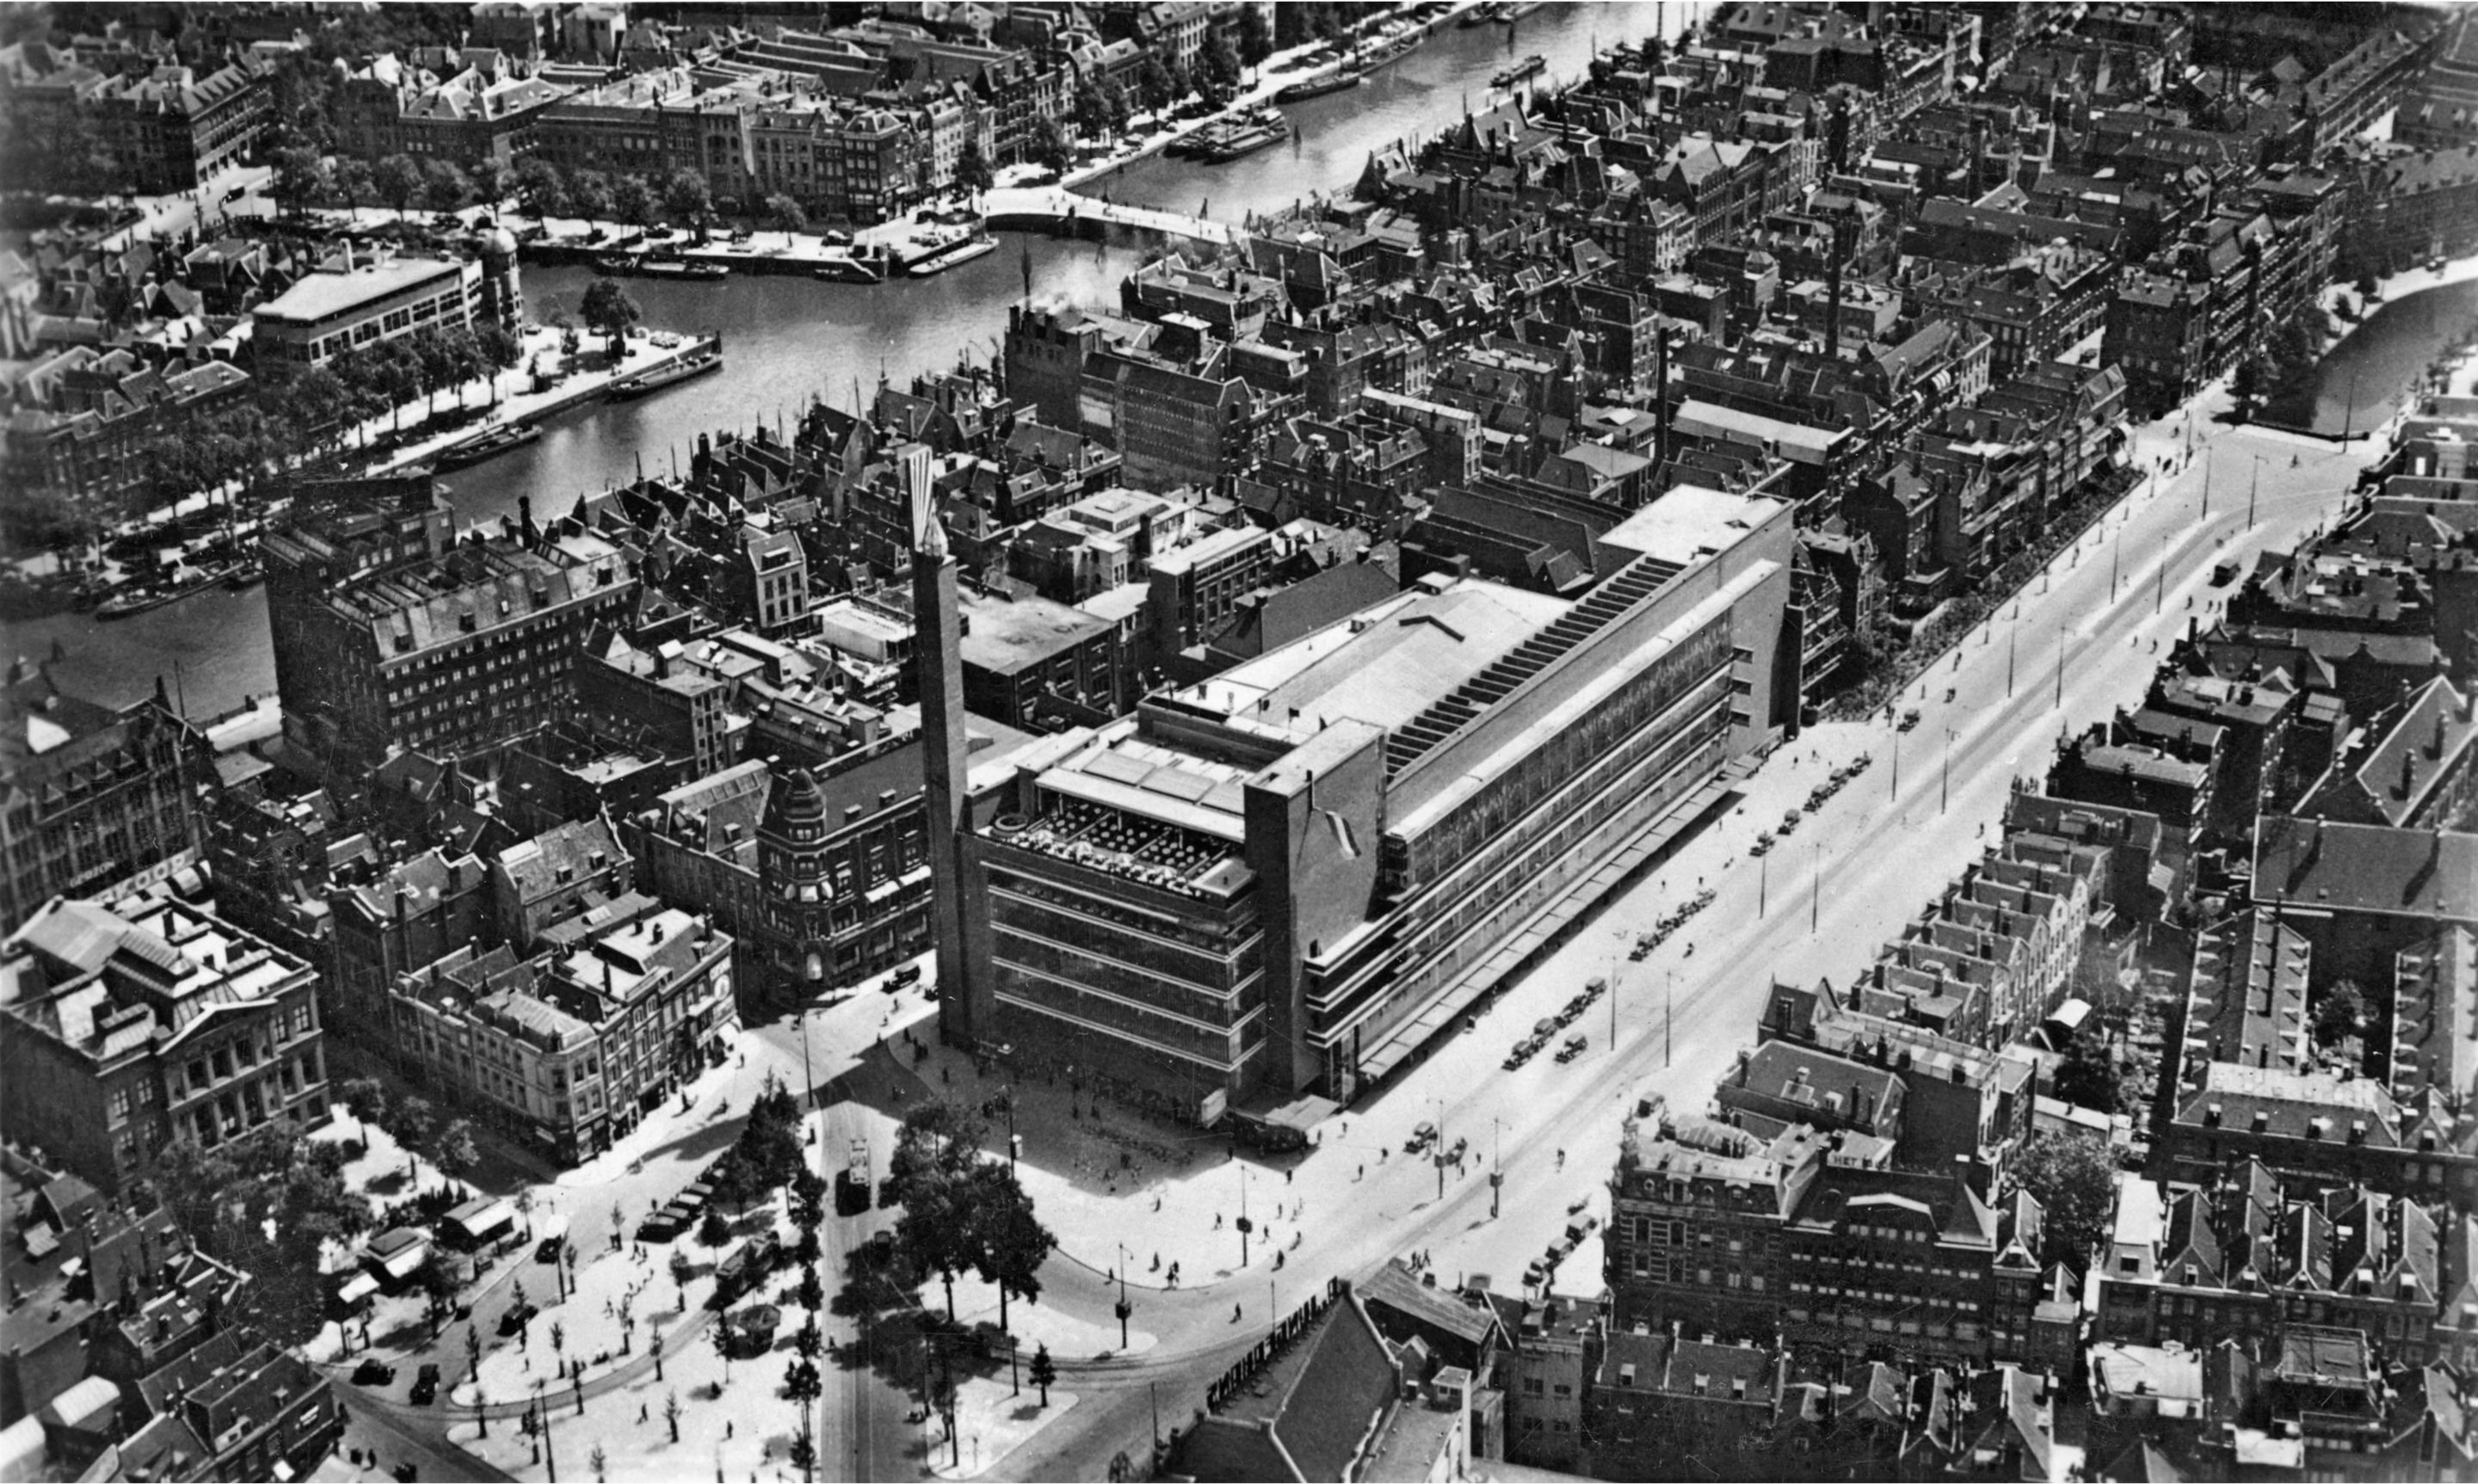 Aerial view of the Coolsingel with the famous Bijenkorf department store Bund